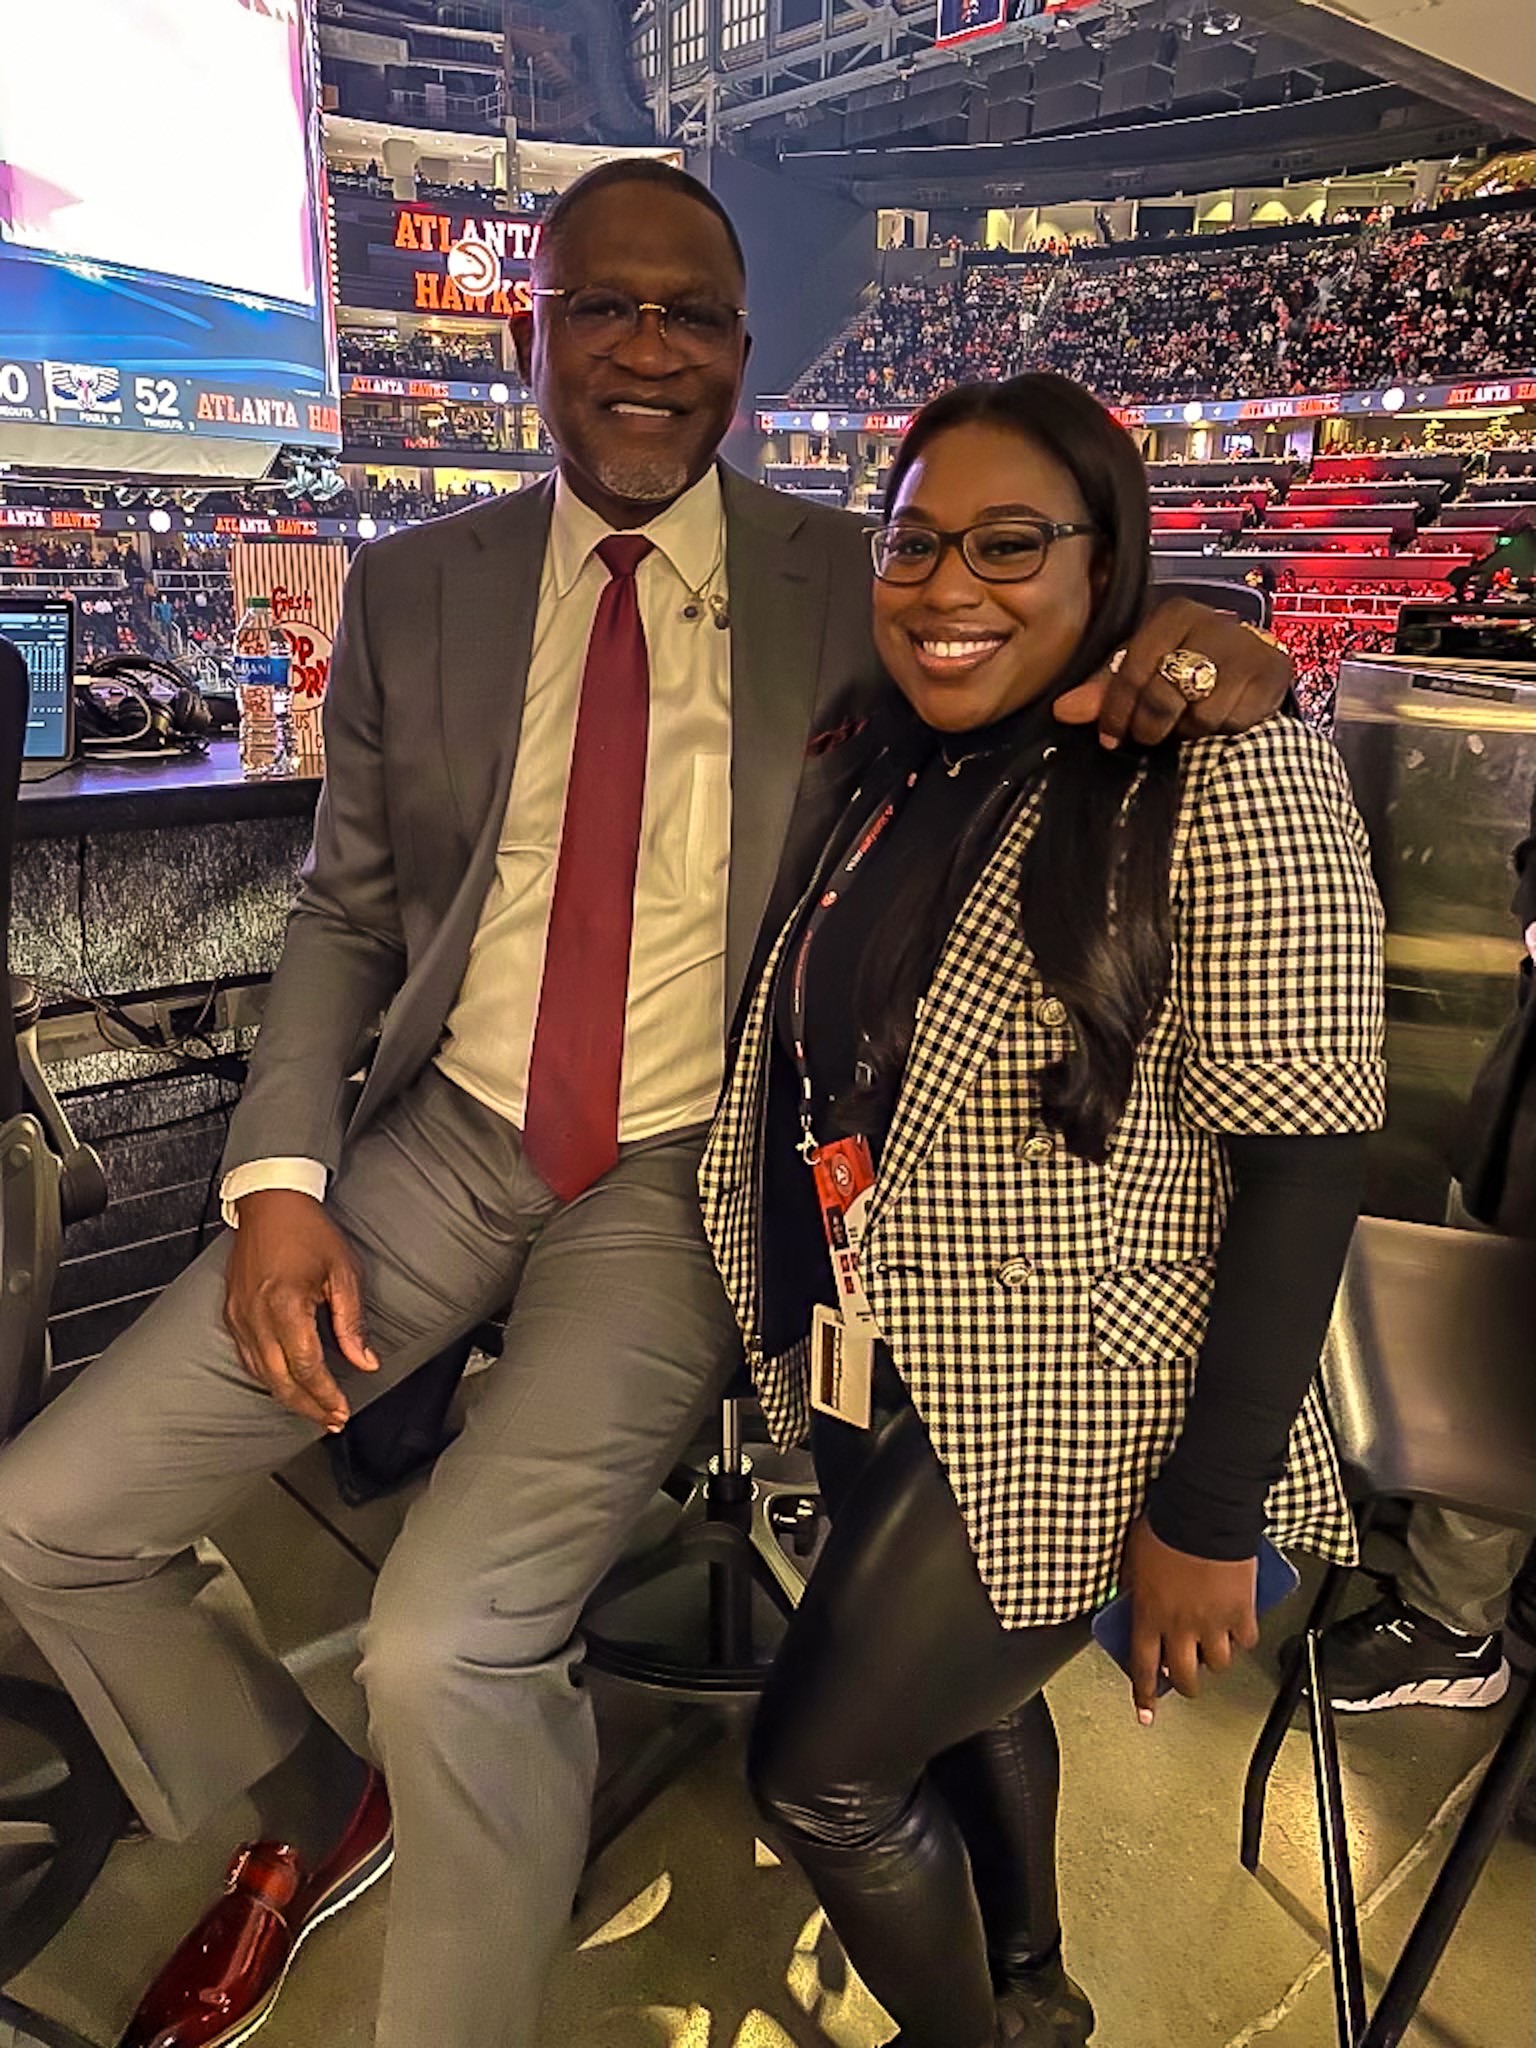 Former Hawks player and current Vice President of Atlanta Hawks Basketball Operations Dominique Wilkins and alumna Missy Dotson